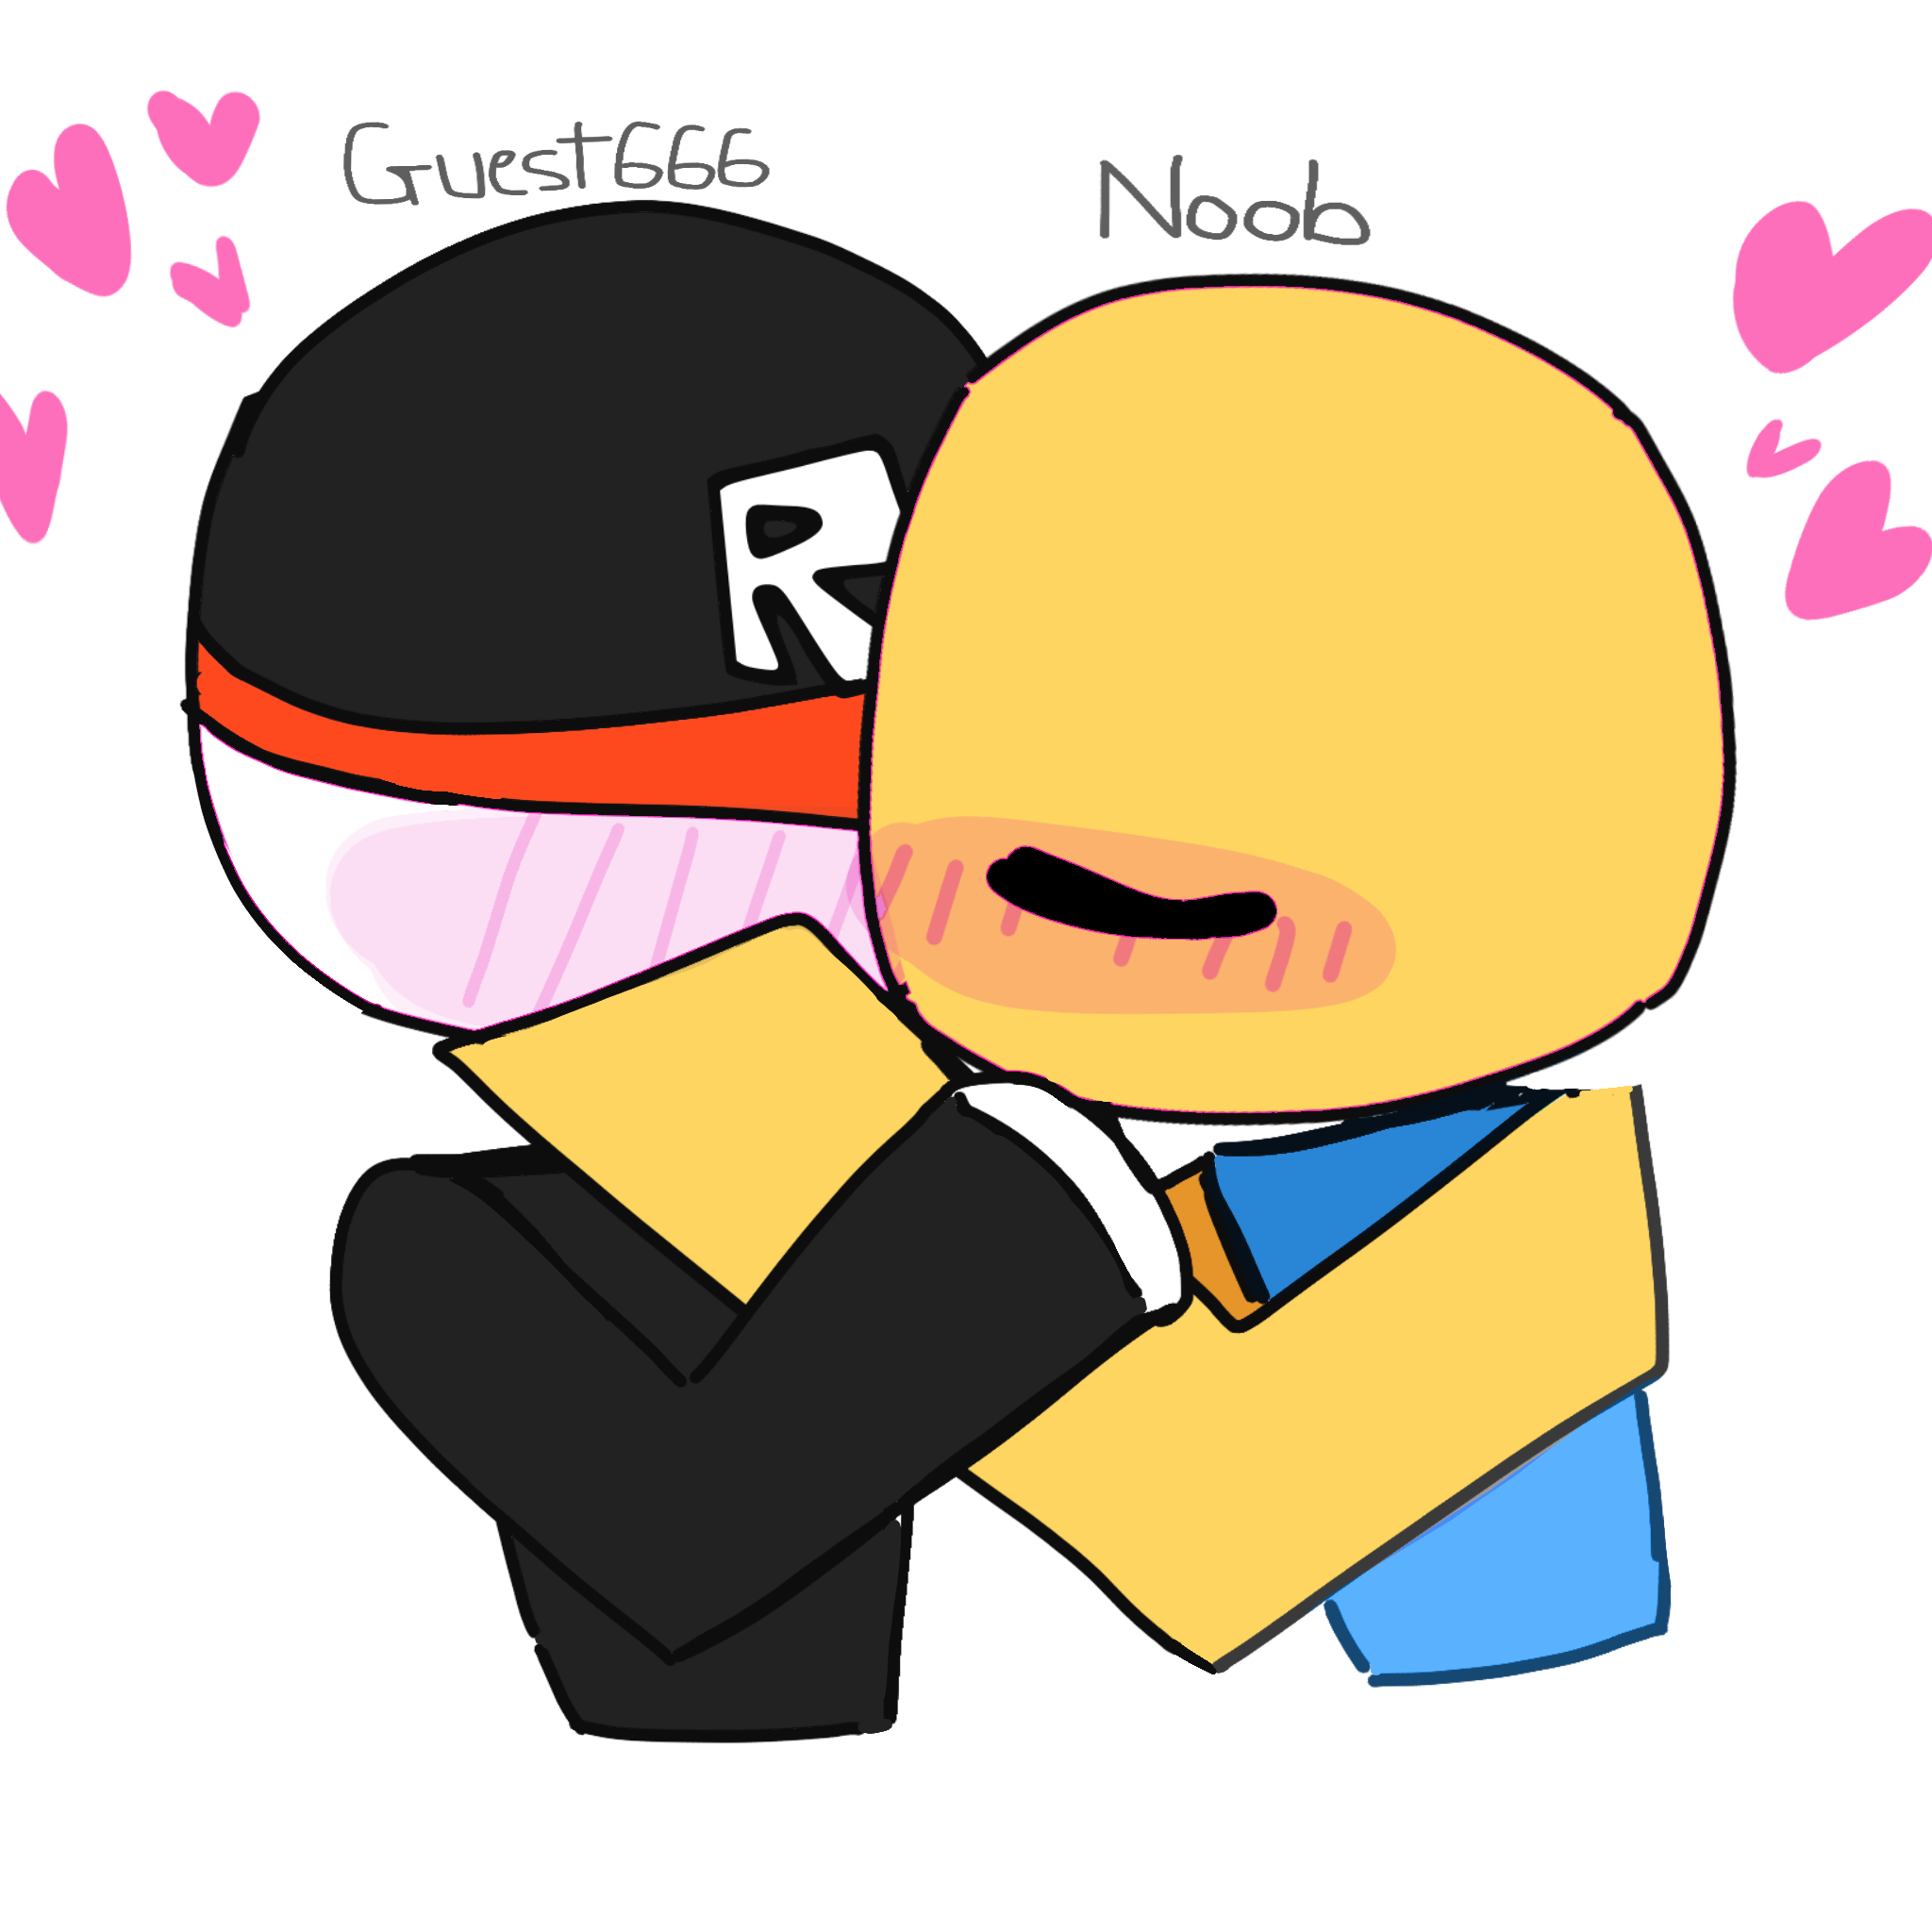 Guesty Guest! Nooby Noob! by MercylessCreeper on DeviantArt